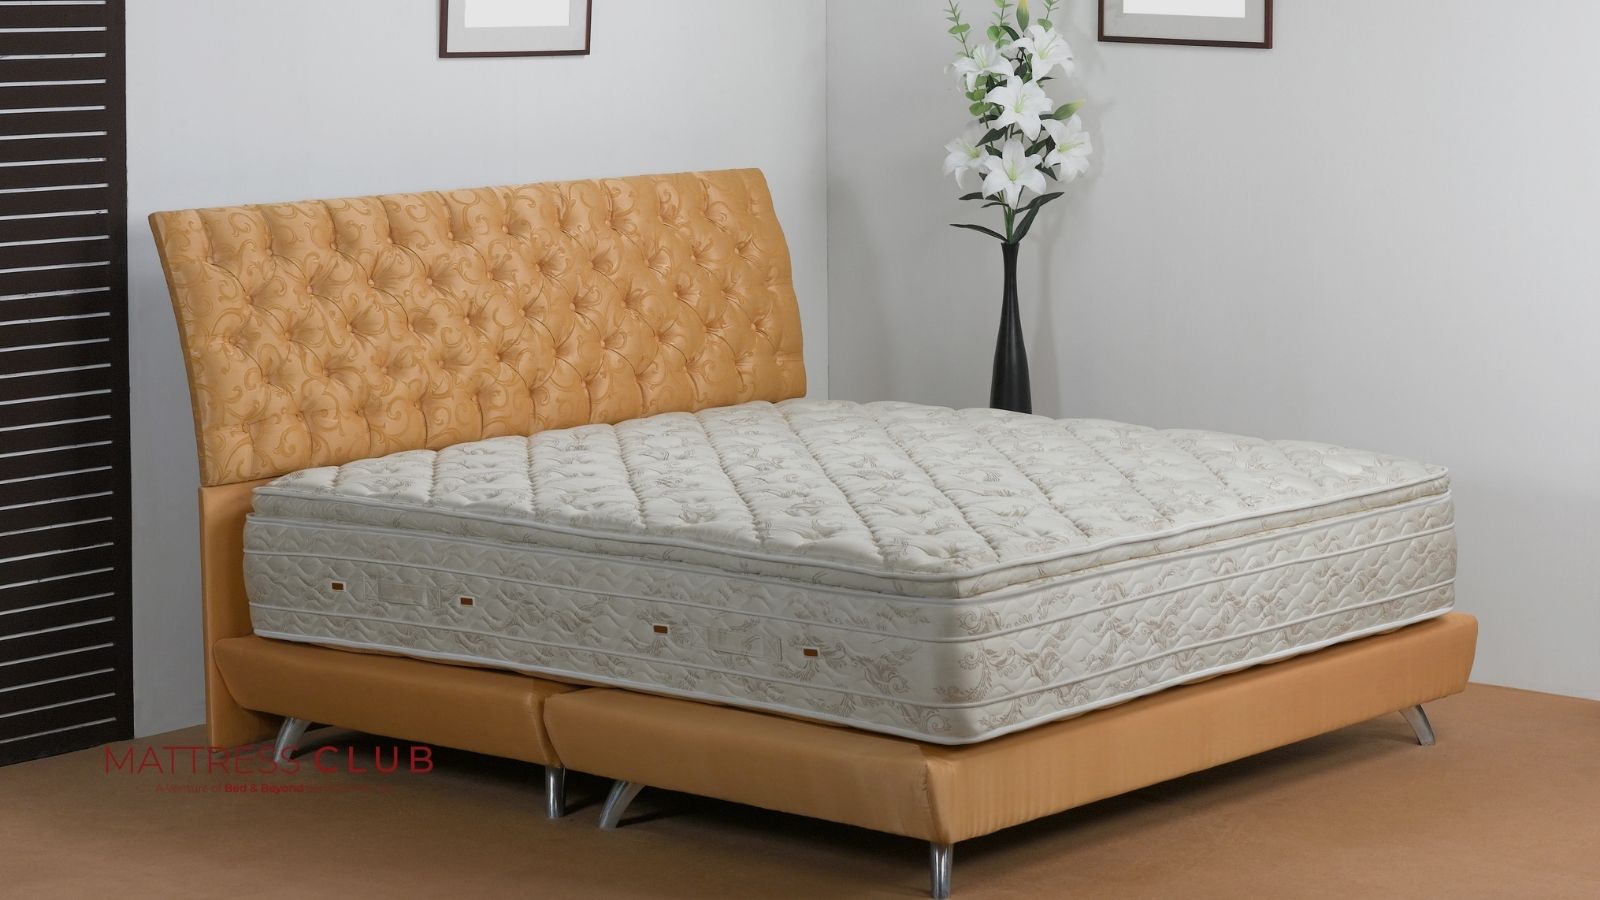 Choosing your perfect sustainable mattress